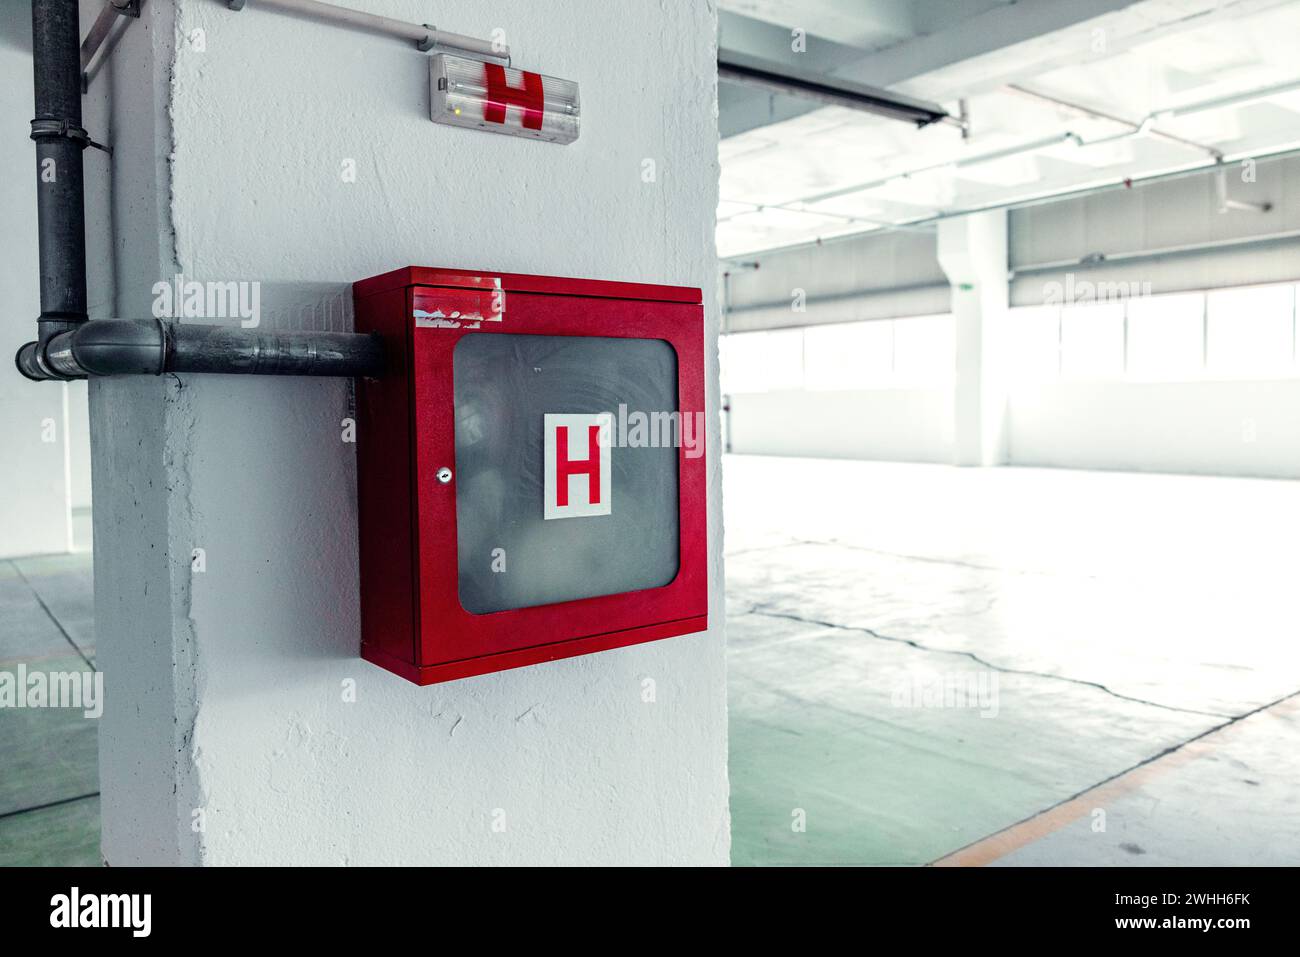 preparing for the emergency conflagration, fire protection cabinet with sign in an industrial building Stock Photo